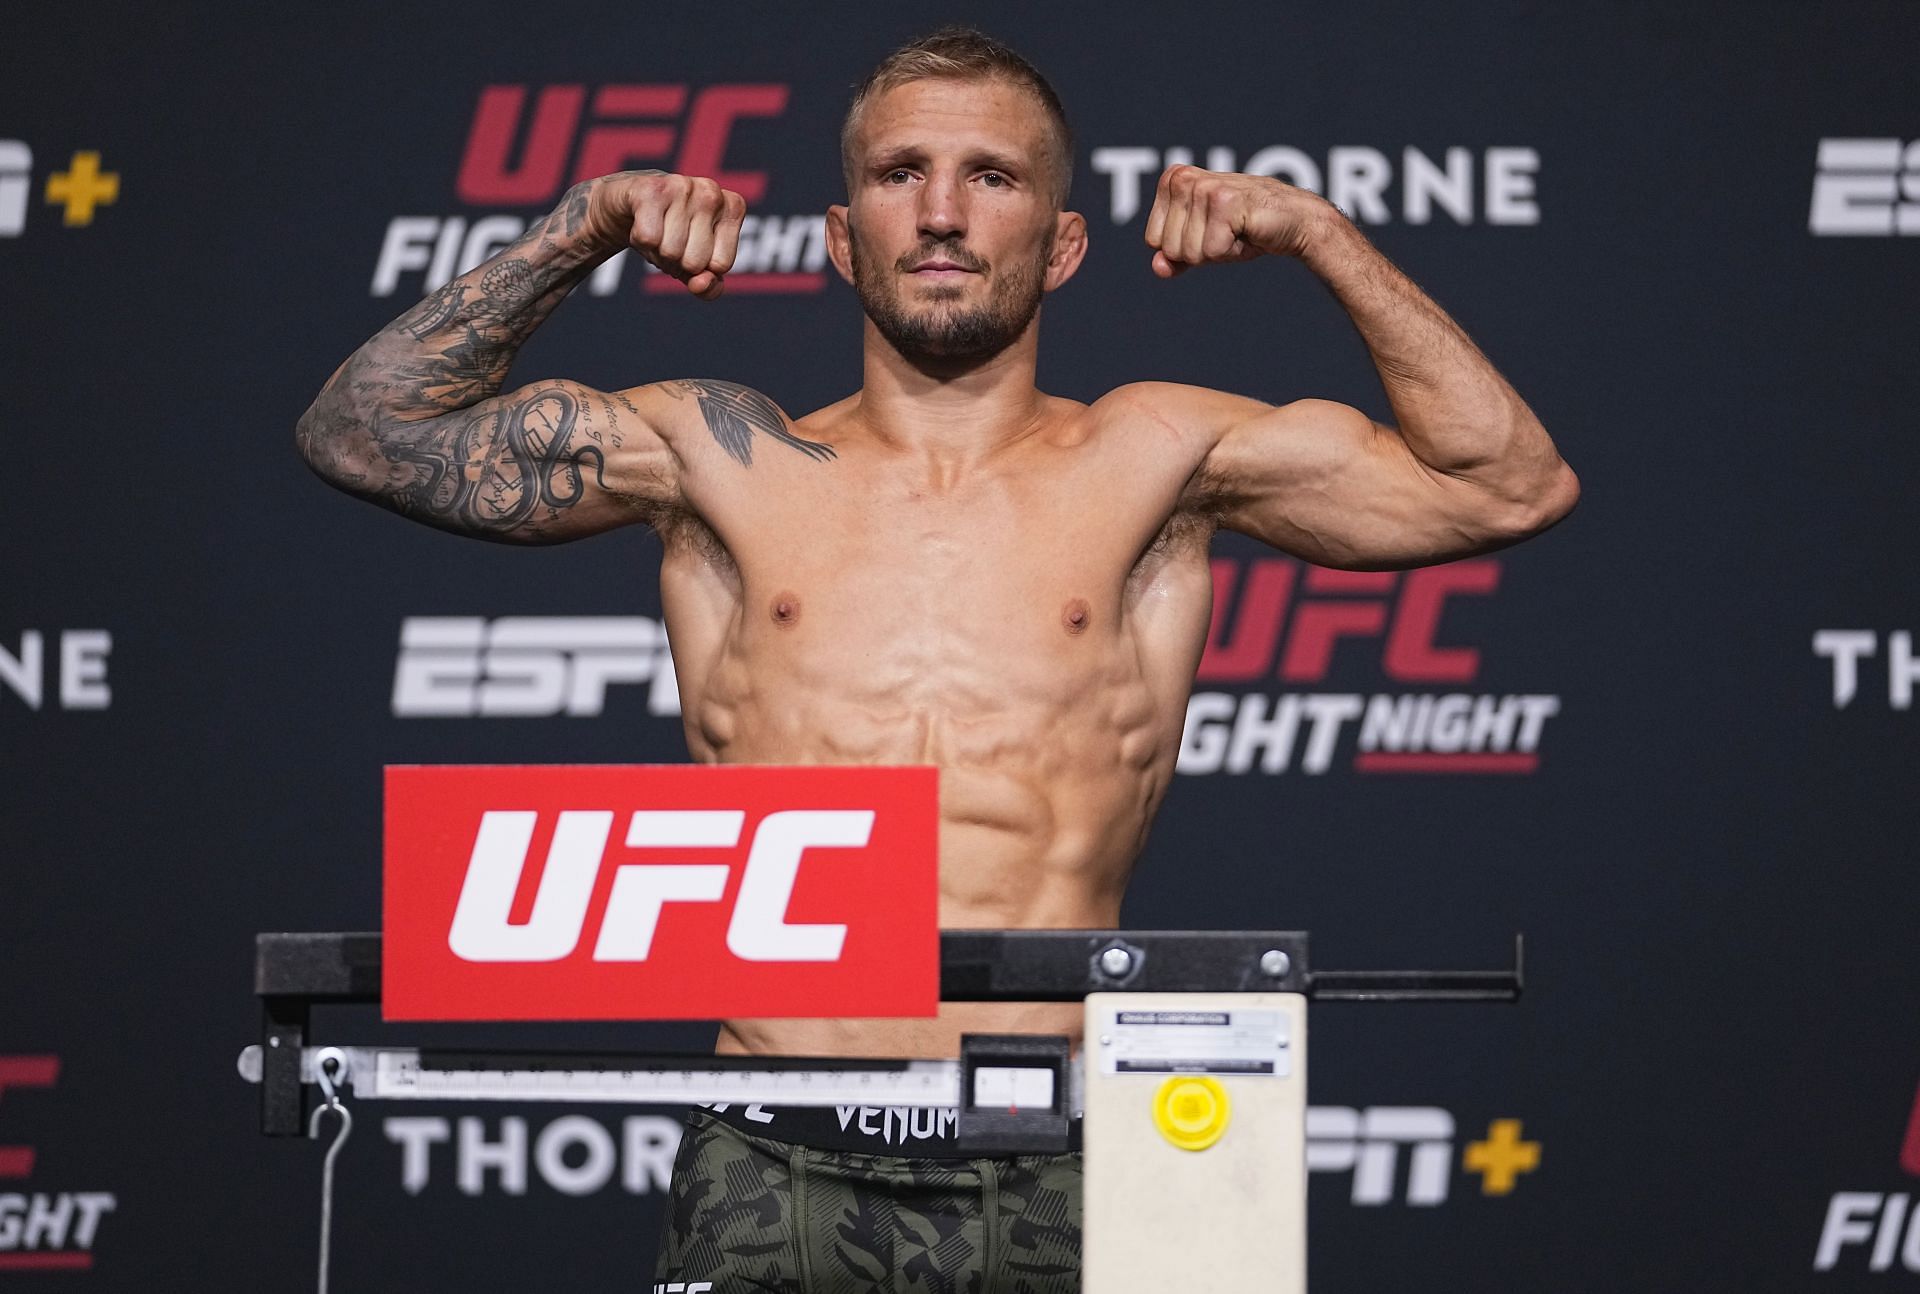 TJ Dillashaw&#039;s upcoming bout with Aljamain Sterling is just one potentially great bantamweight title fight we may be treated to